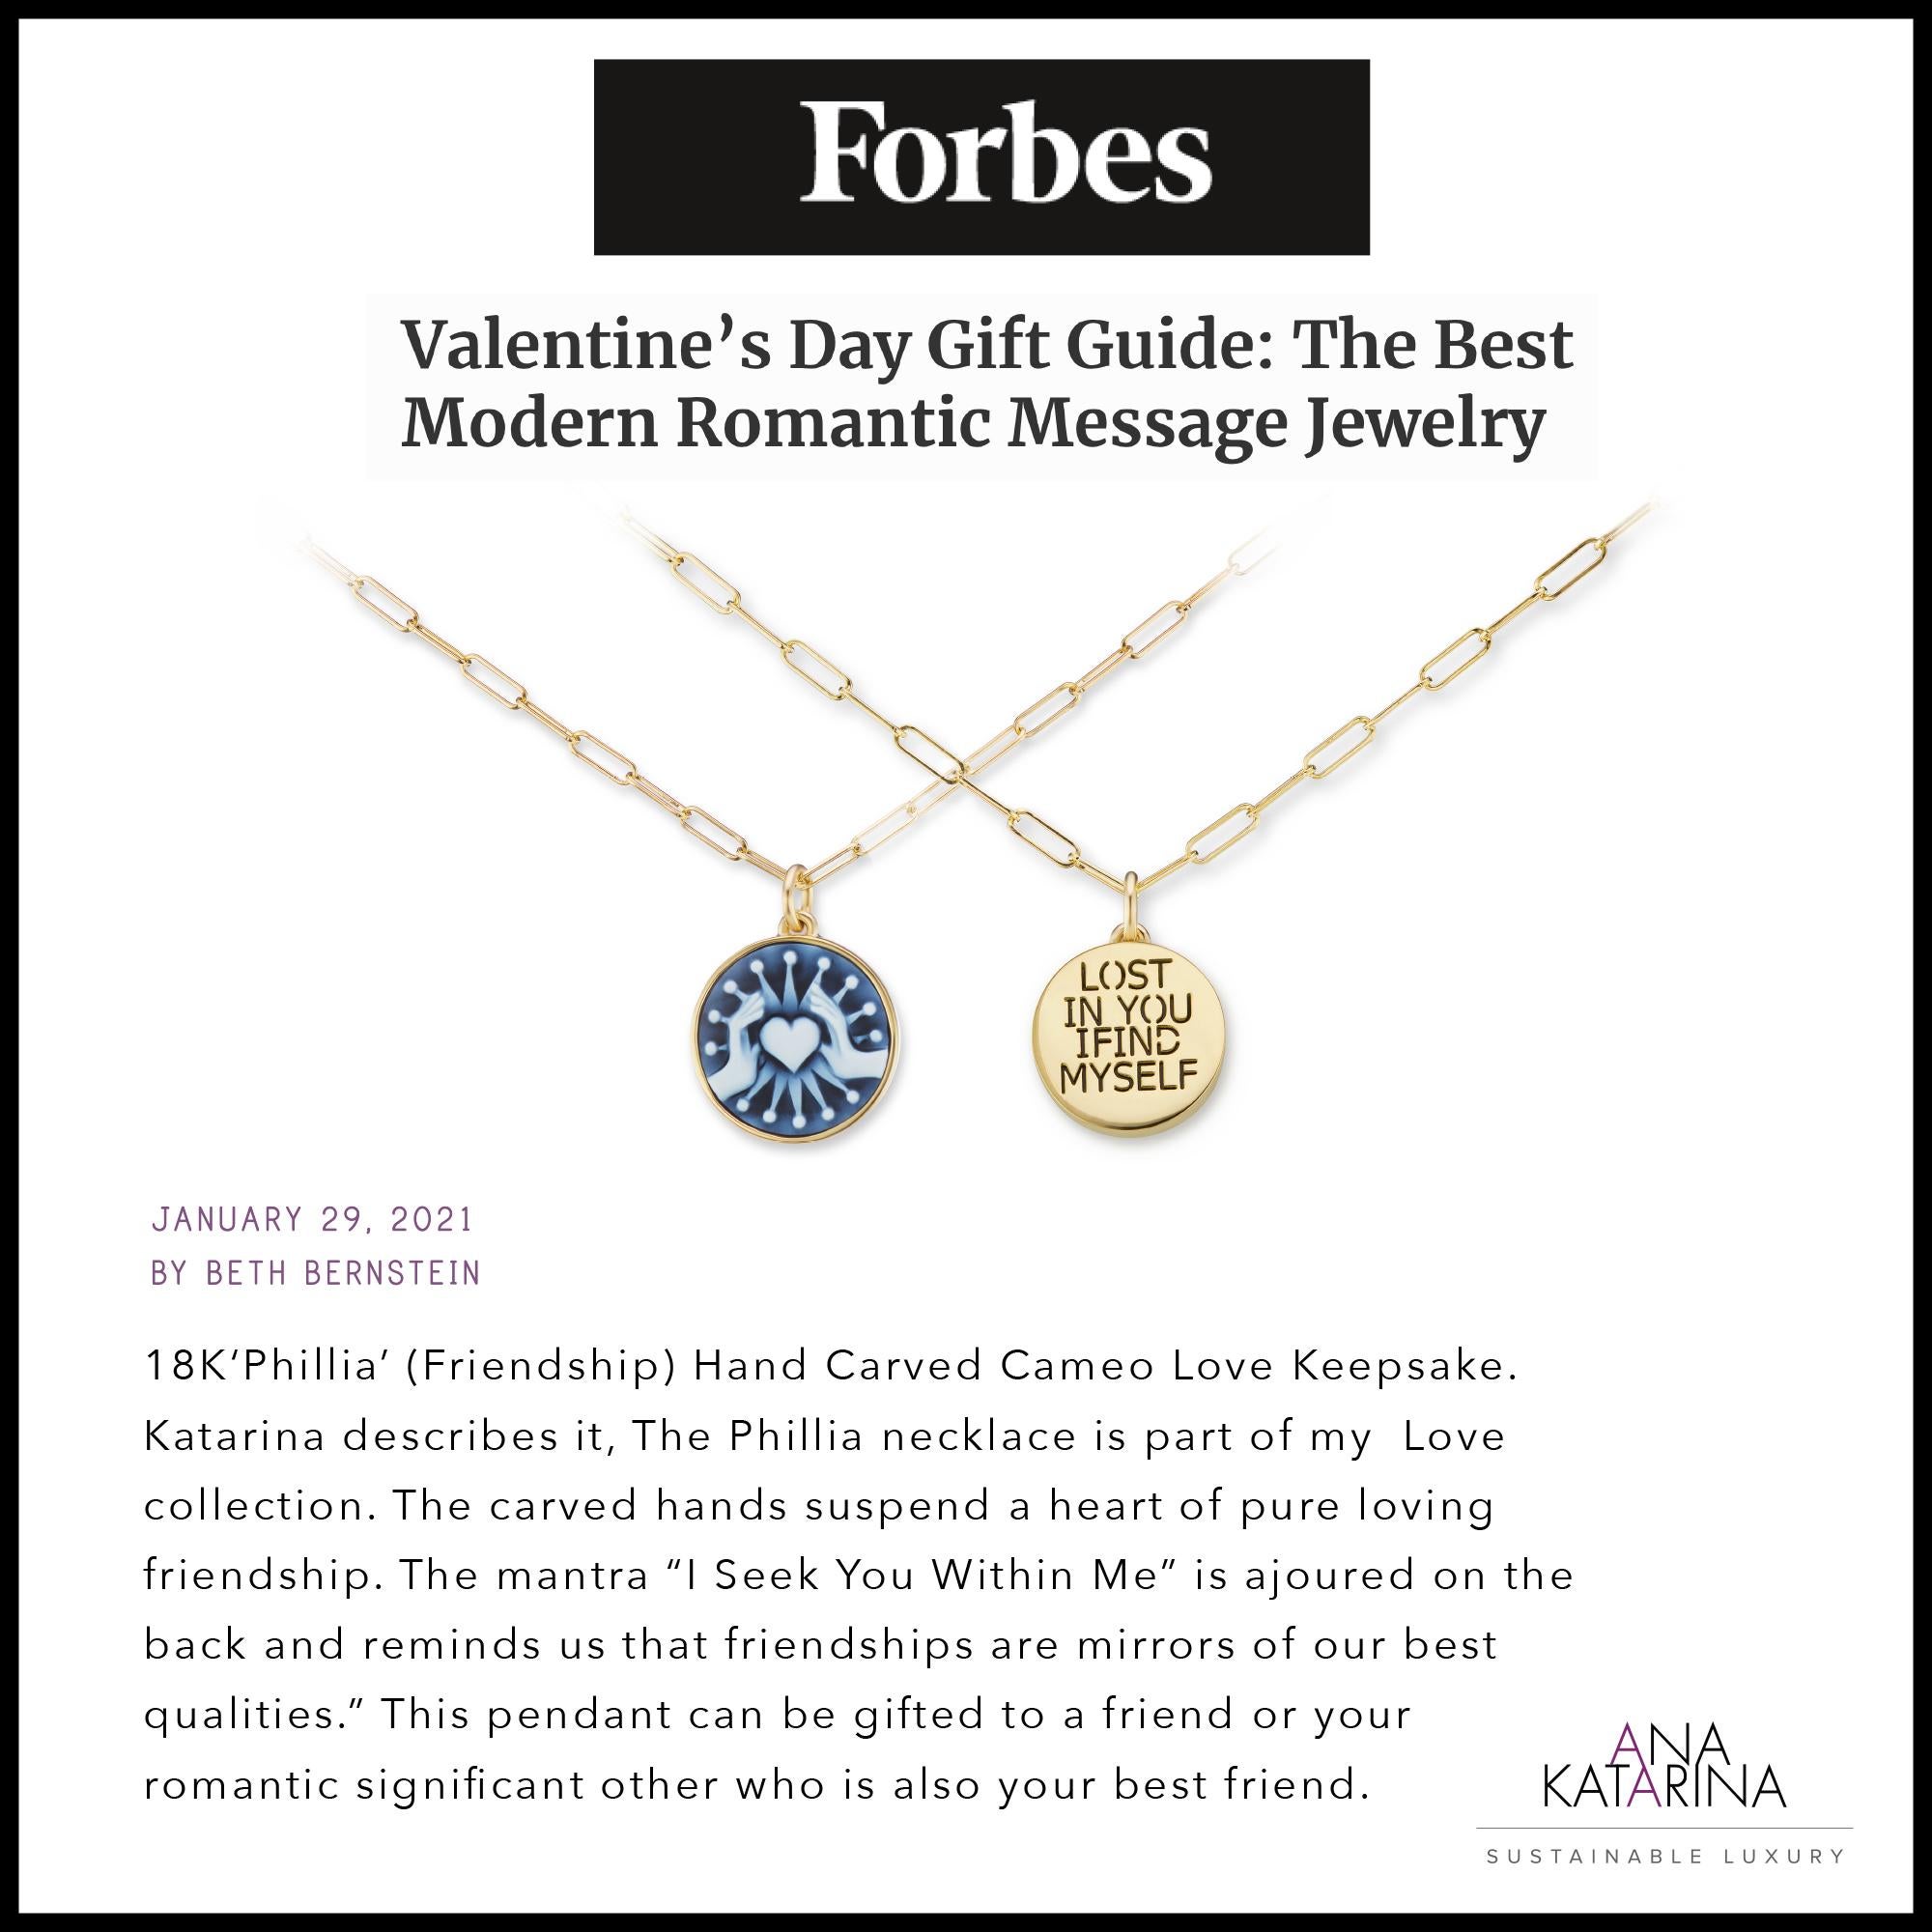 The Ludus charm is a work of art set in a bezel of 18k yellow gold. The blue agate cameo is hand created by a master carver bringing out the feelings of butterflies we feel in our guts when experiencing the playful joy of new connections and love.